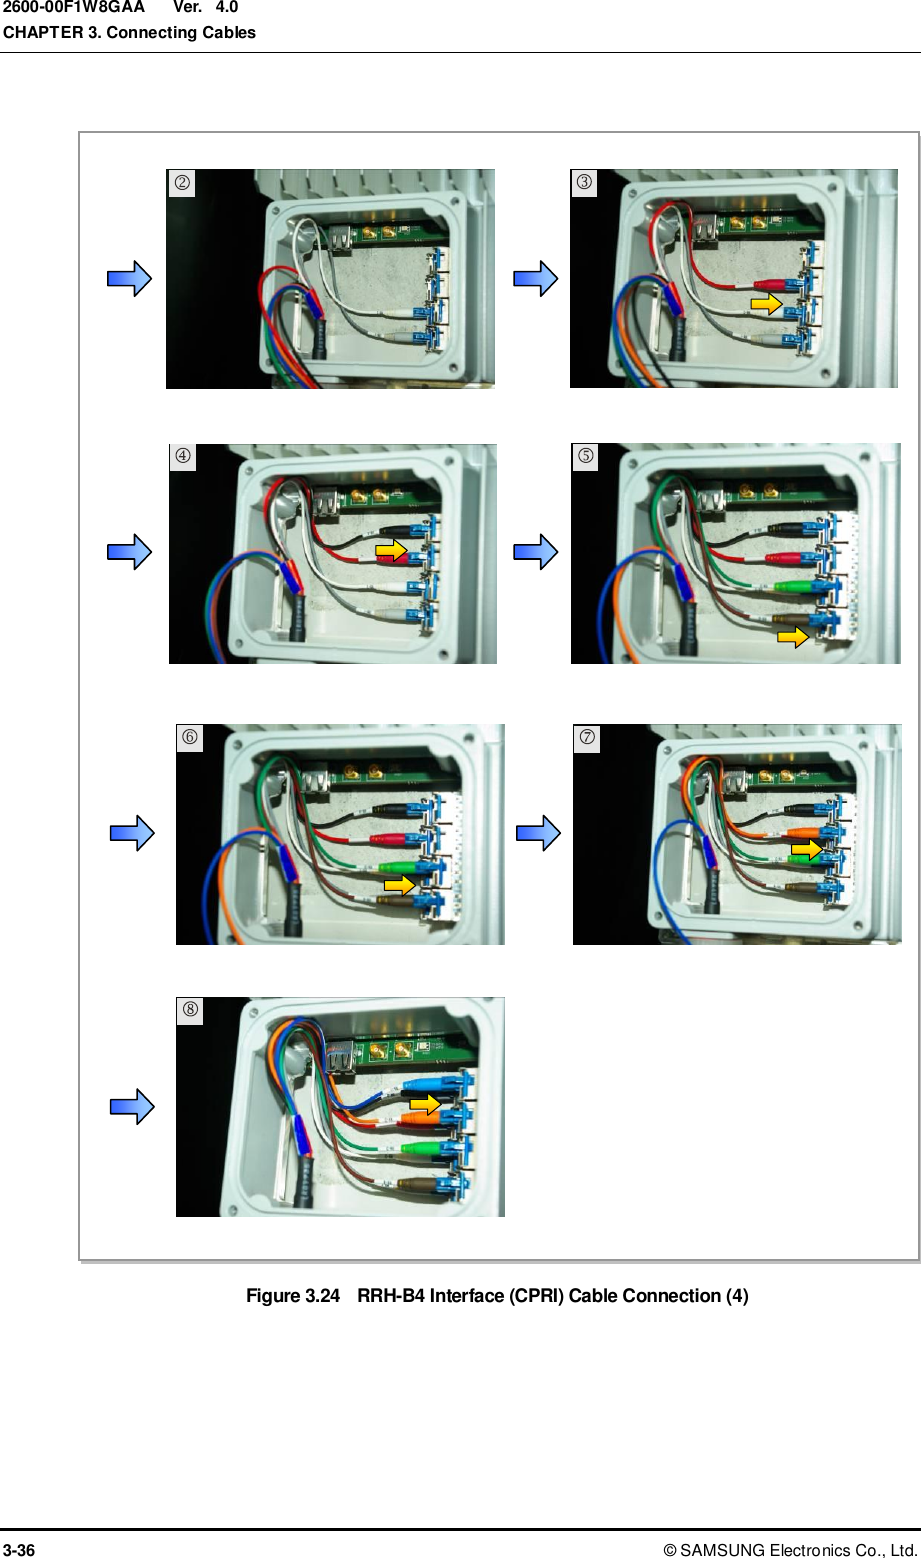  Ver.  CHAPTER 3. Connecting Cables 3-36 ©  SAMSUNG Electronics Co., Ltd. 2600-00F1W8GAA 4.0  Figure 3.24  RRH-B4 Interface (CPRI) Cable Connection (4)        